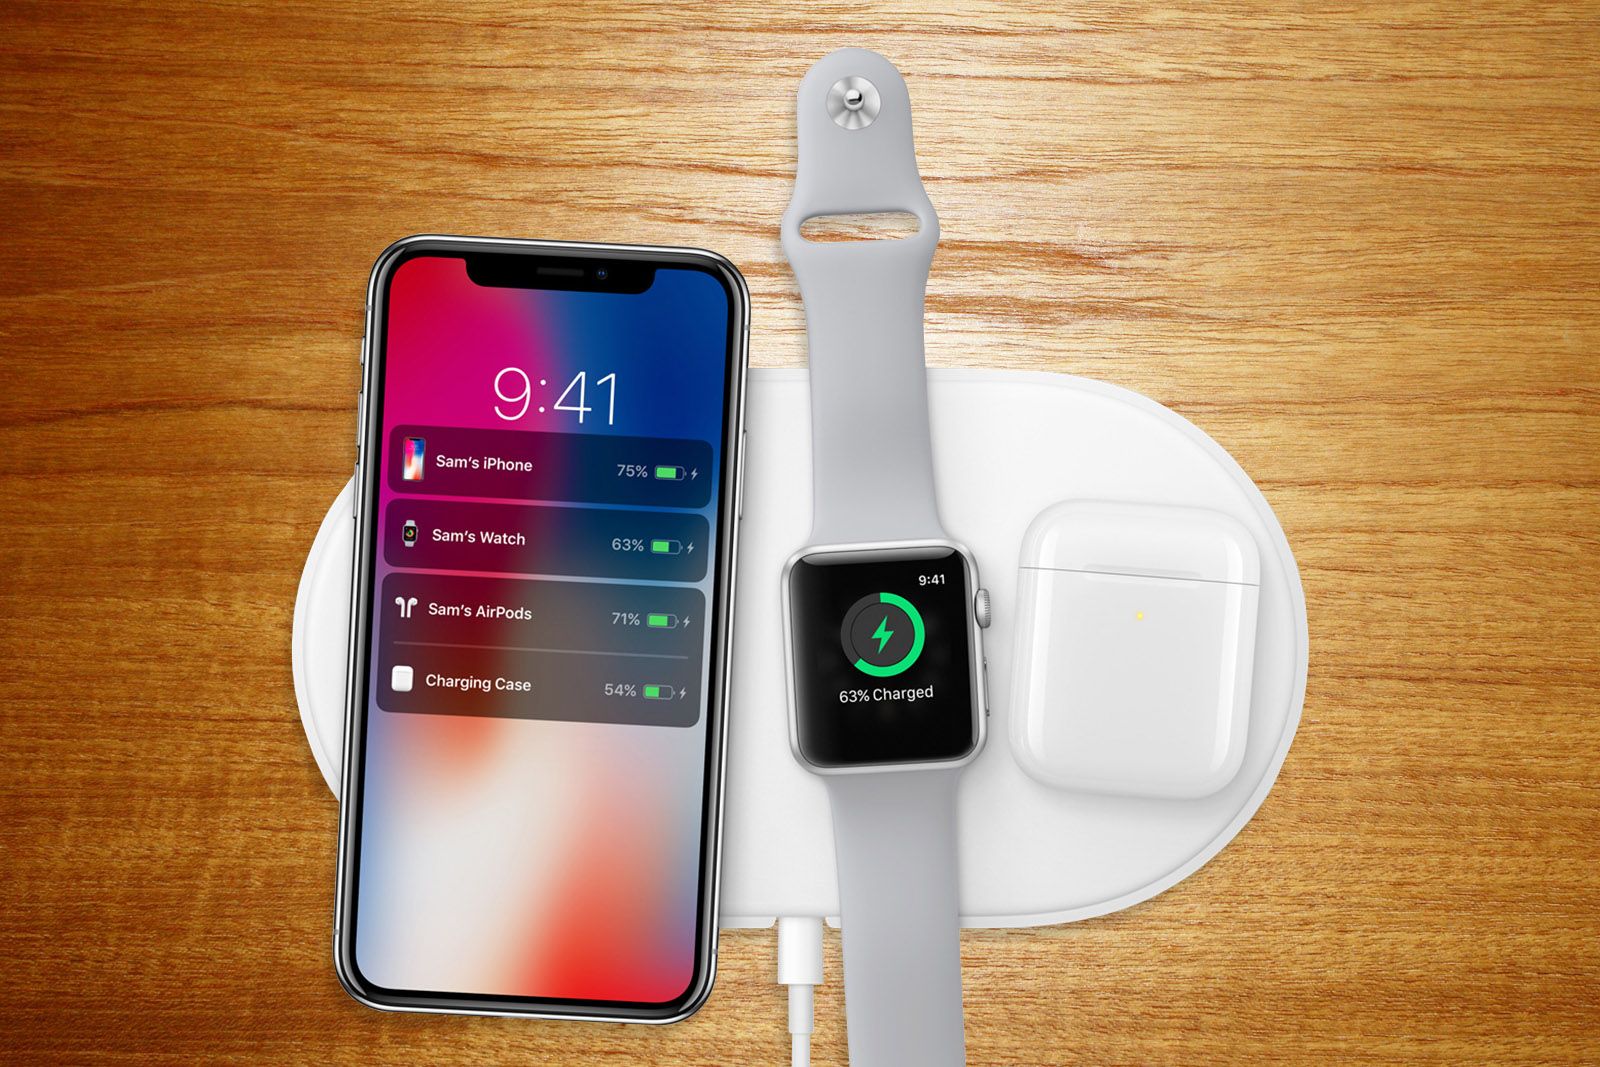 Apple AirPods 2 AirPower iPad mini 5 and new iPad release date revealed image 1